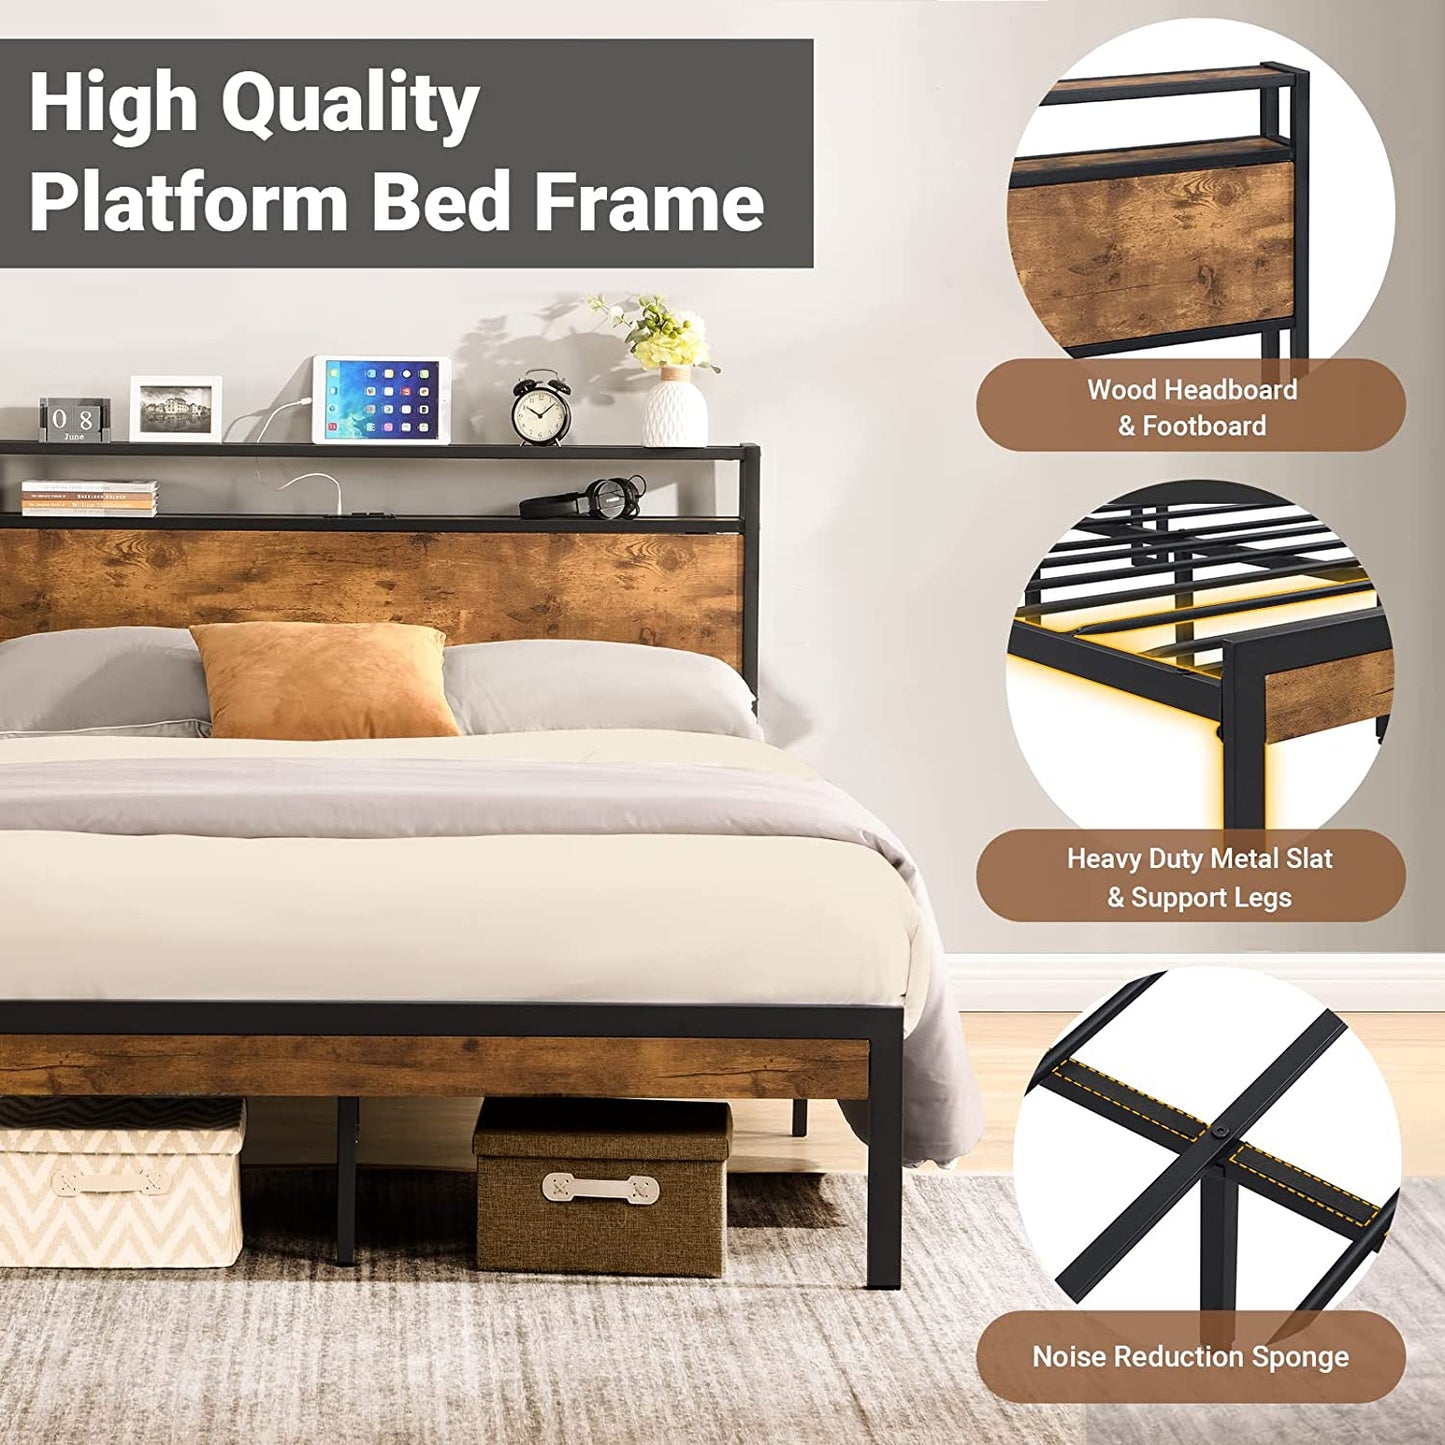 Zevemomo Full Bed Frame, Full Size Metal Platform Bed Frame with 2-Tier Storage Wood Headboard and Power Outlets, USB Ports Charging Station/No Box Spring Needed/Noise-Free/Easy Assembly/Brown